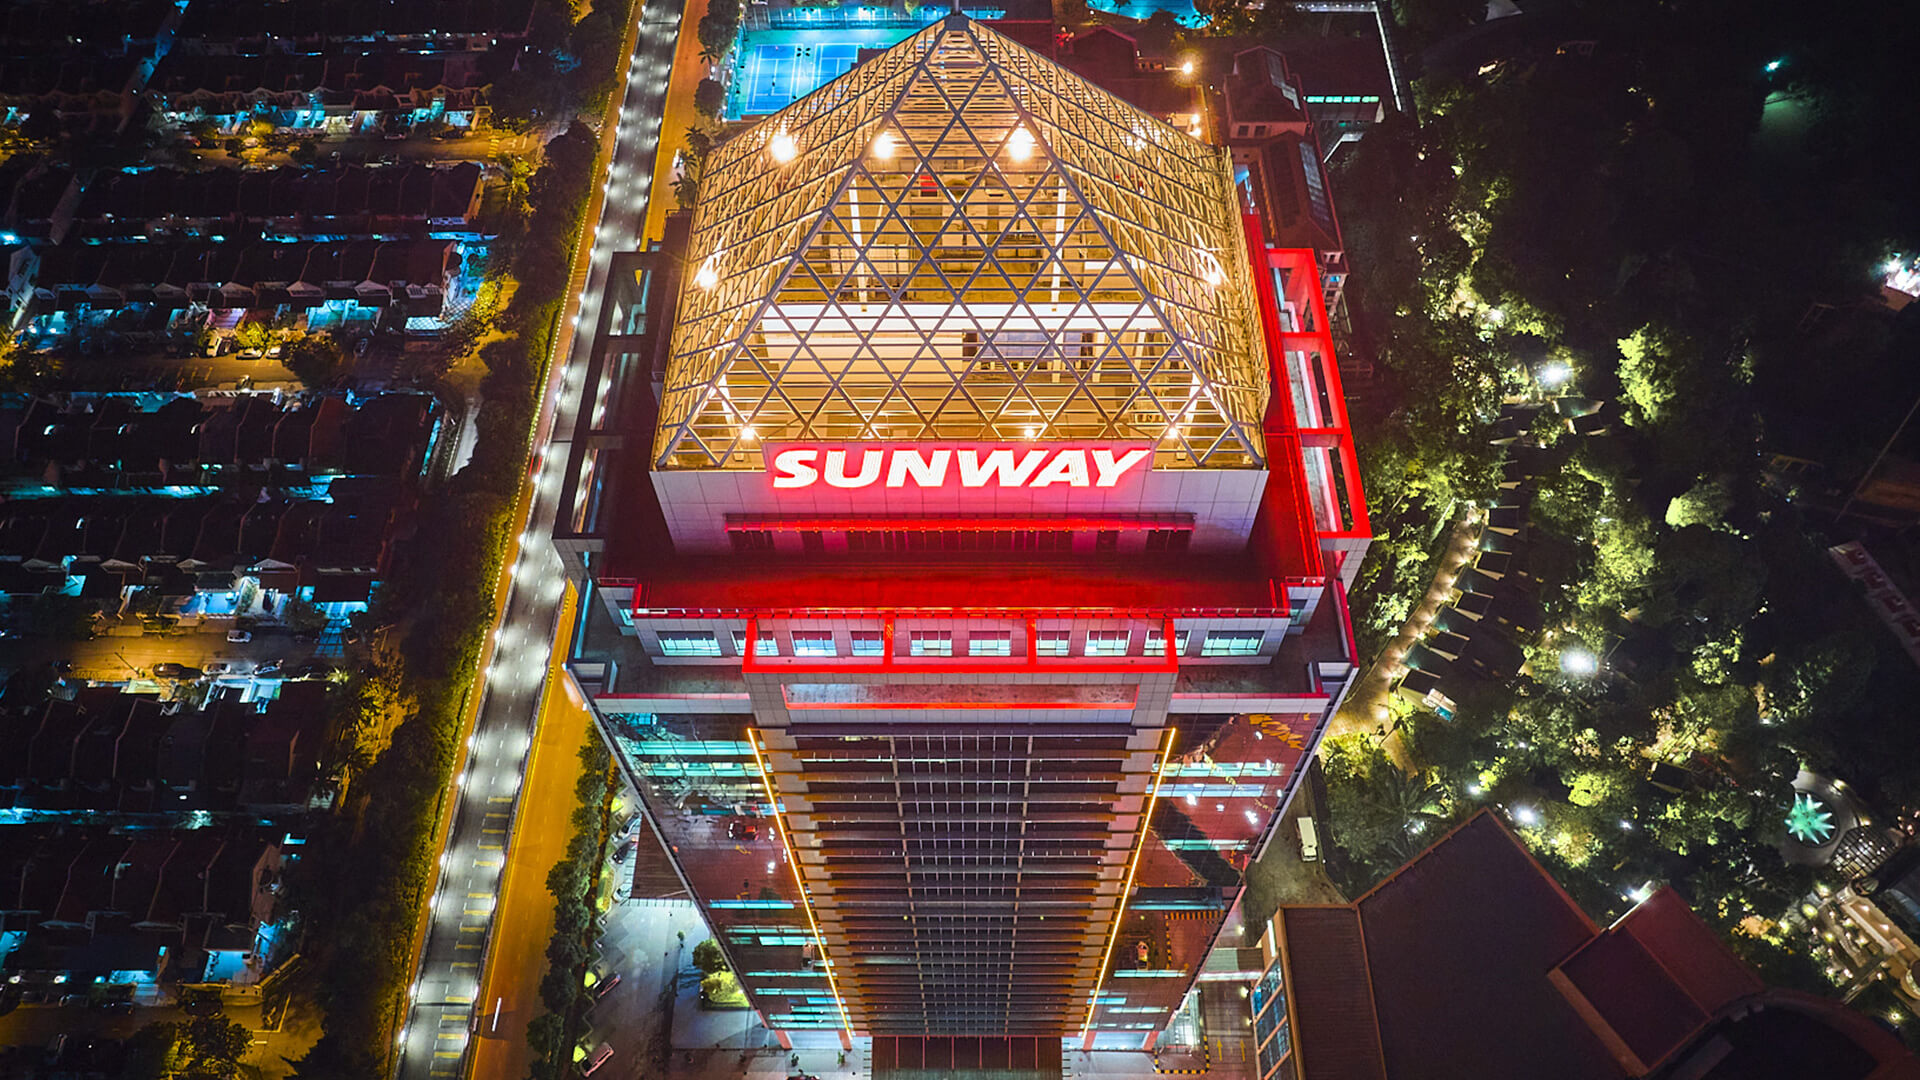 Sunway Berhad Records a Higher Profit Before Tax of RM192.0 Million in Q1 FY2023